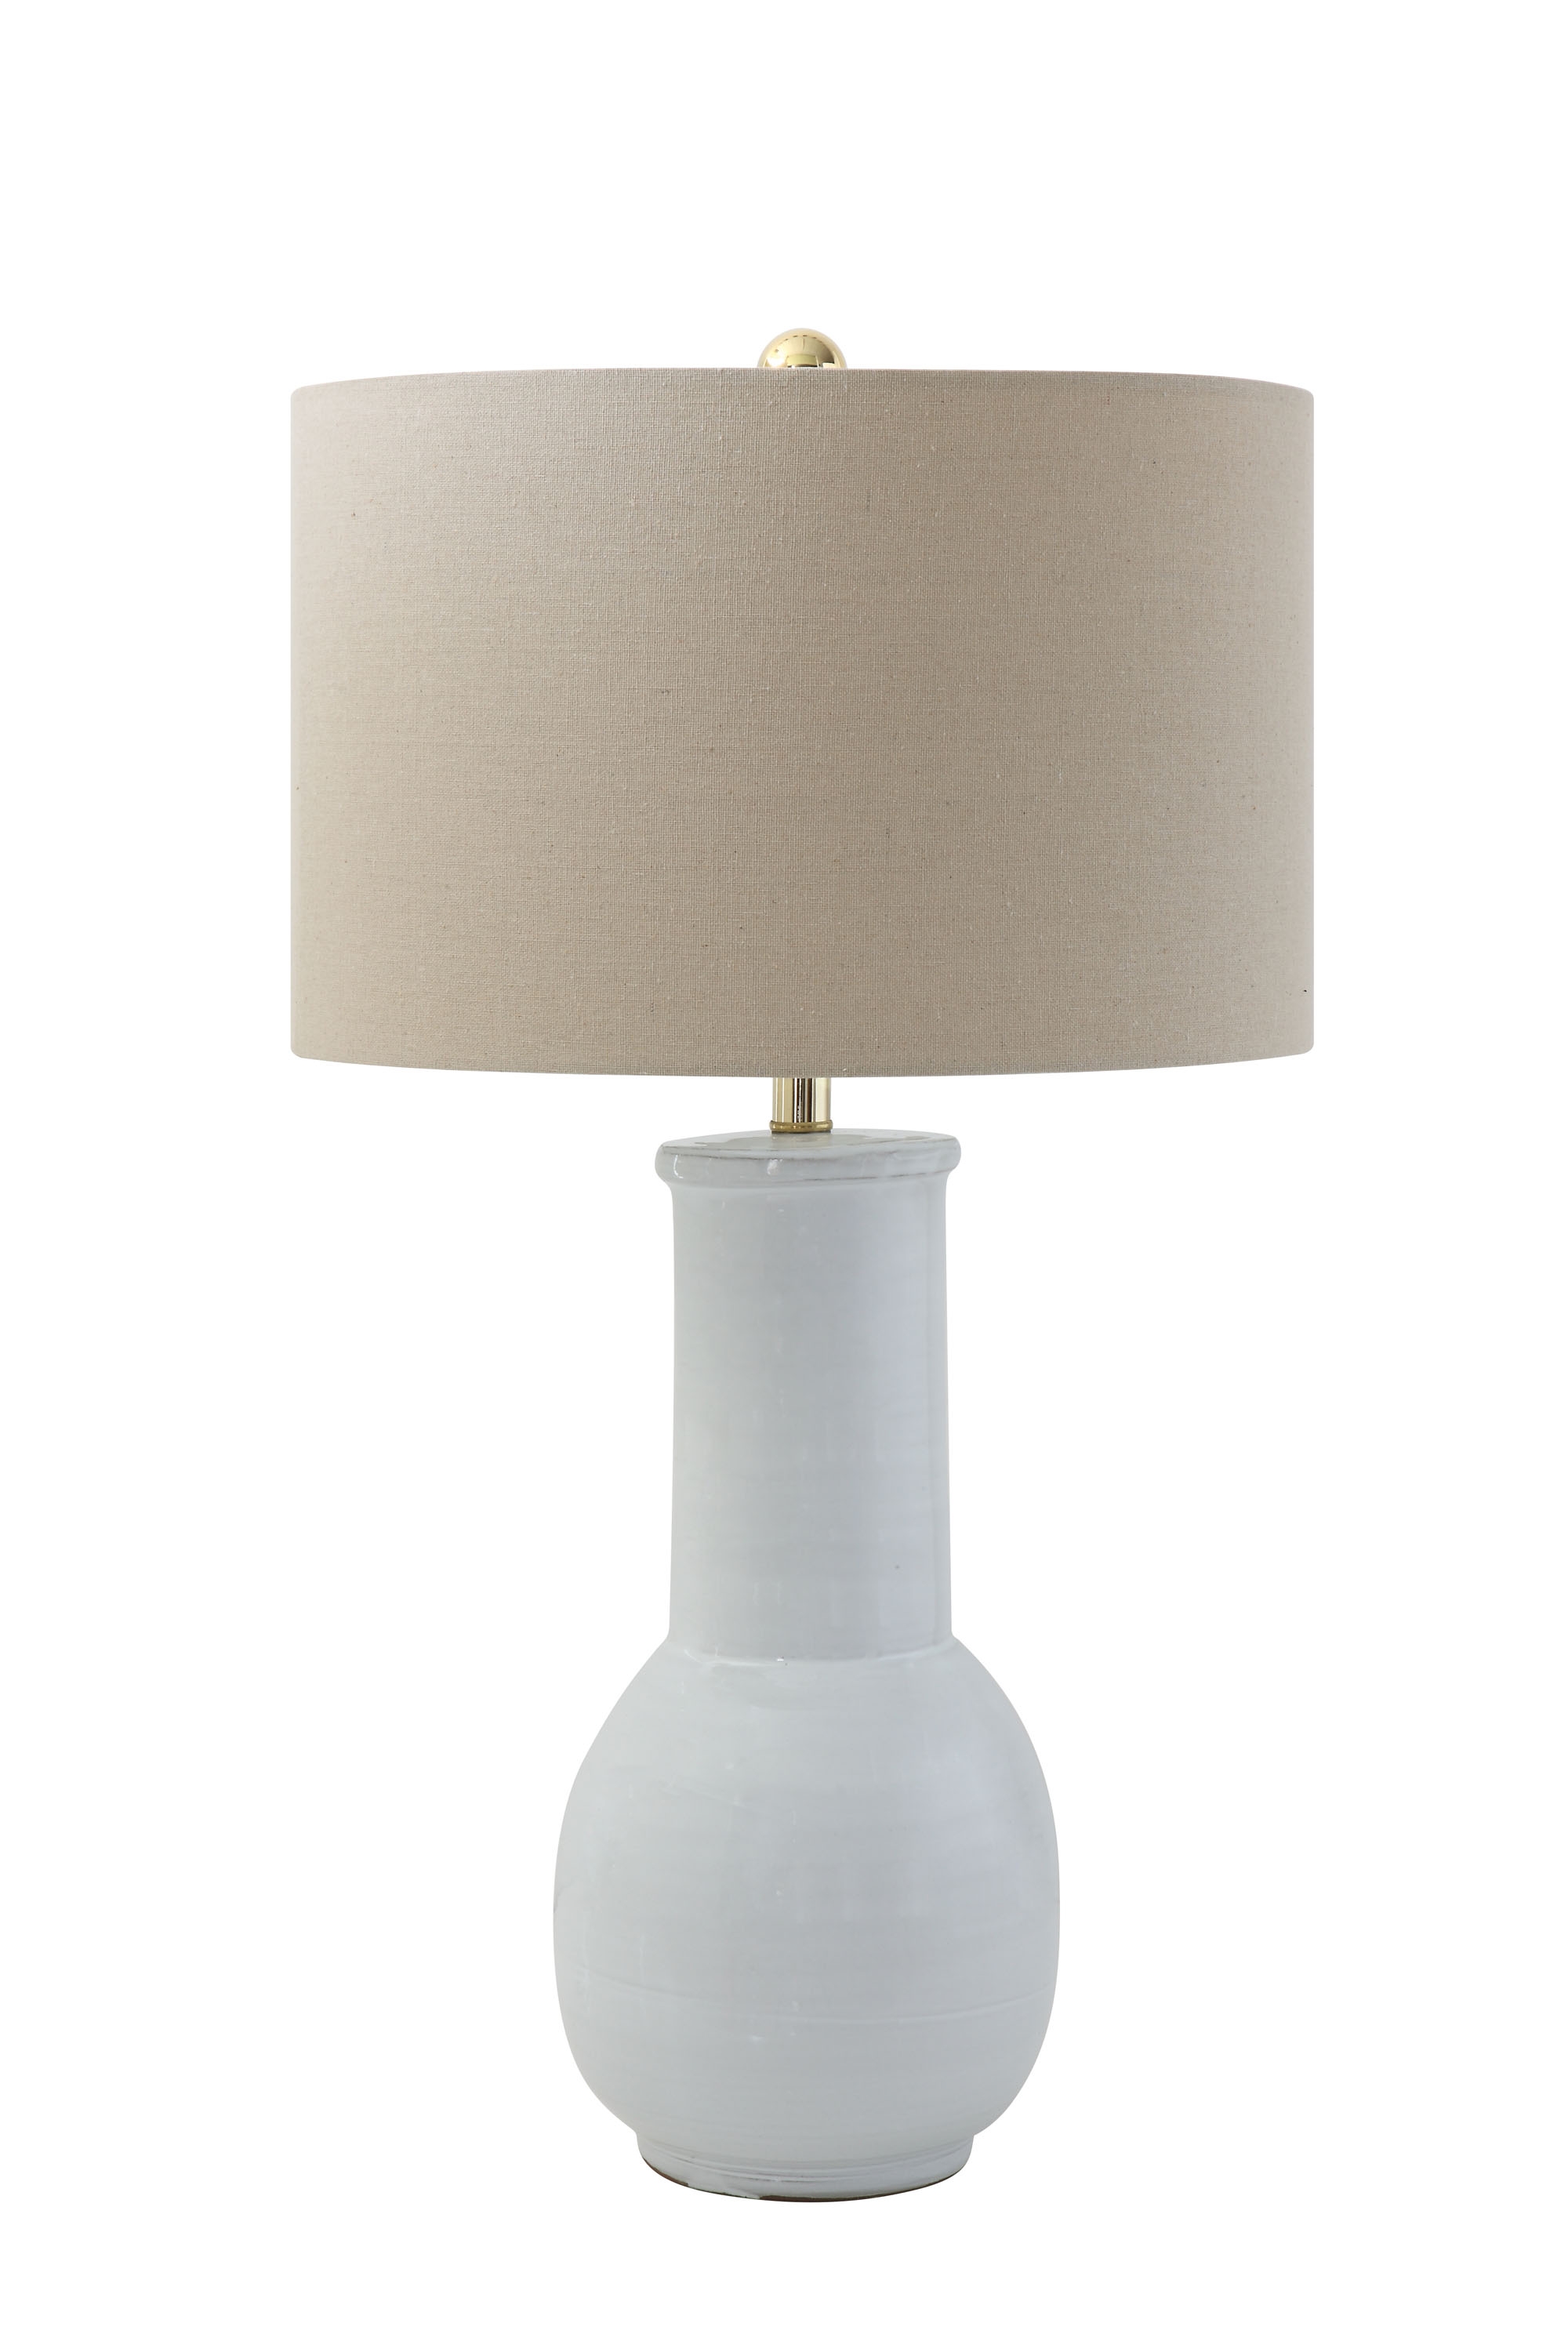 White Terracotta Table Lamp with Natural Linen Shade - Image 0